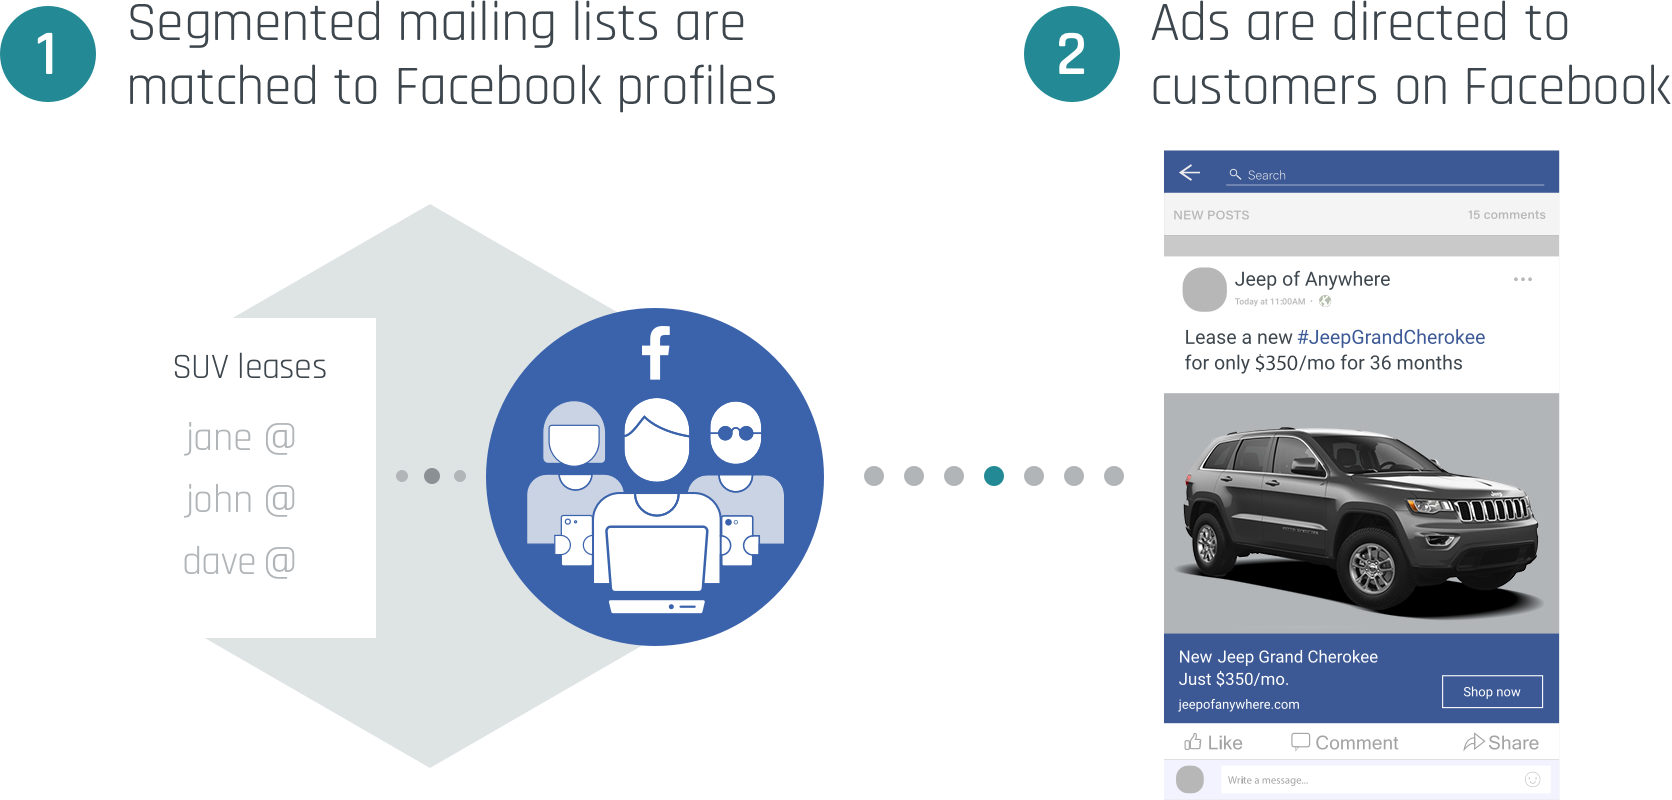 Target your current customers by matching emails and facebook